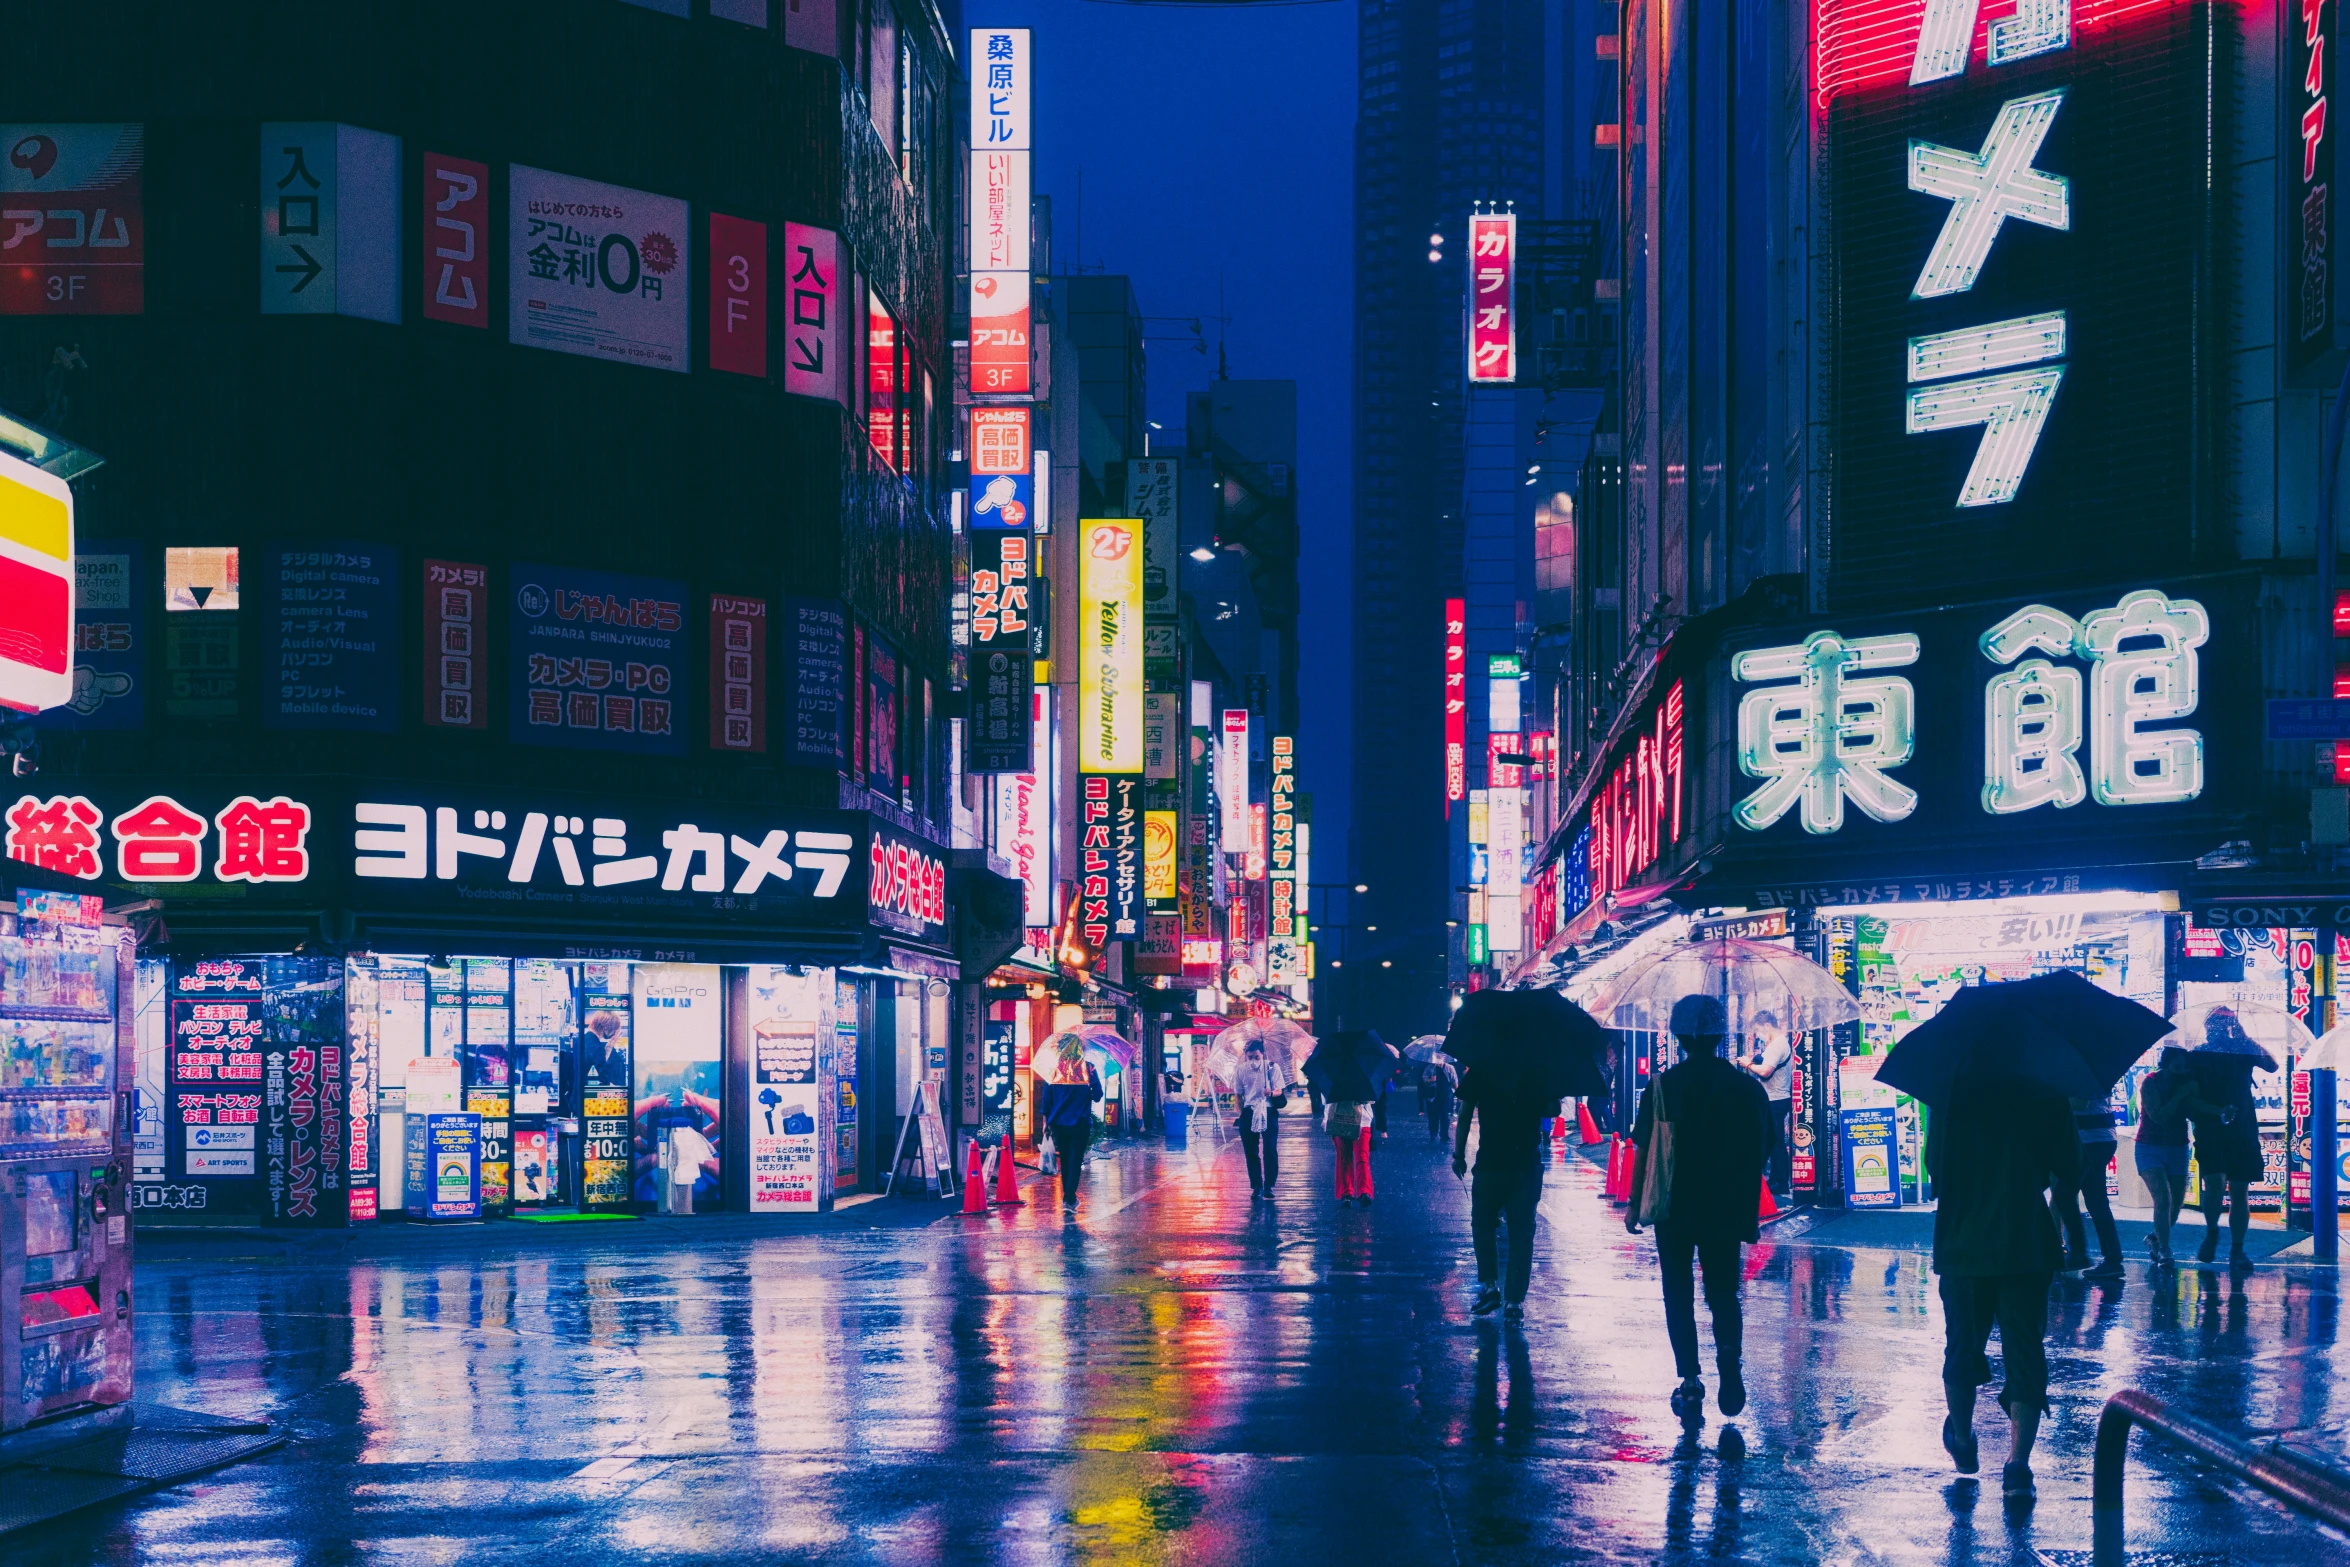 people with umbrellas are walking down a dark city street